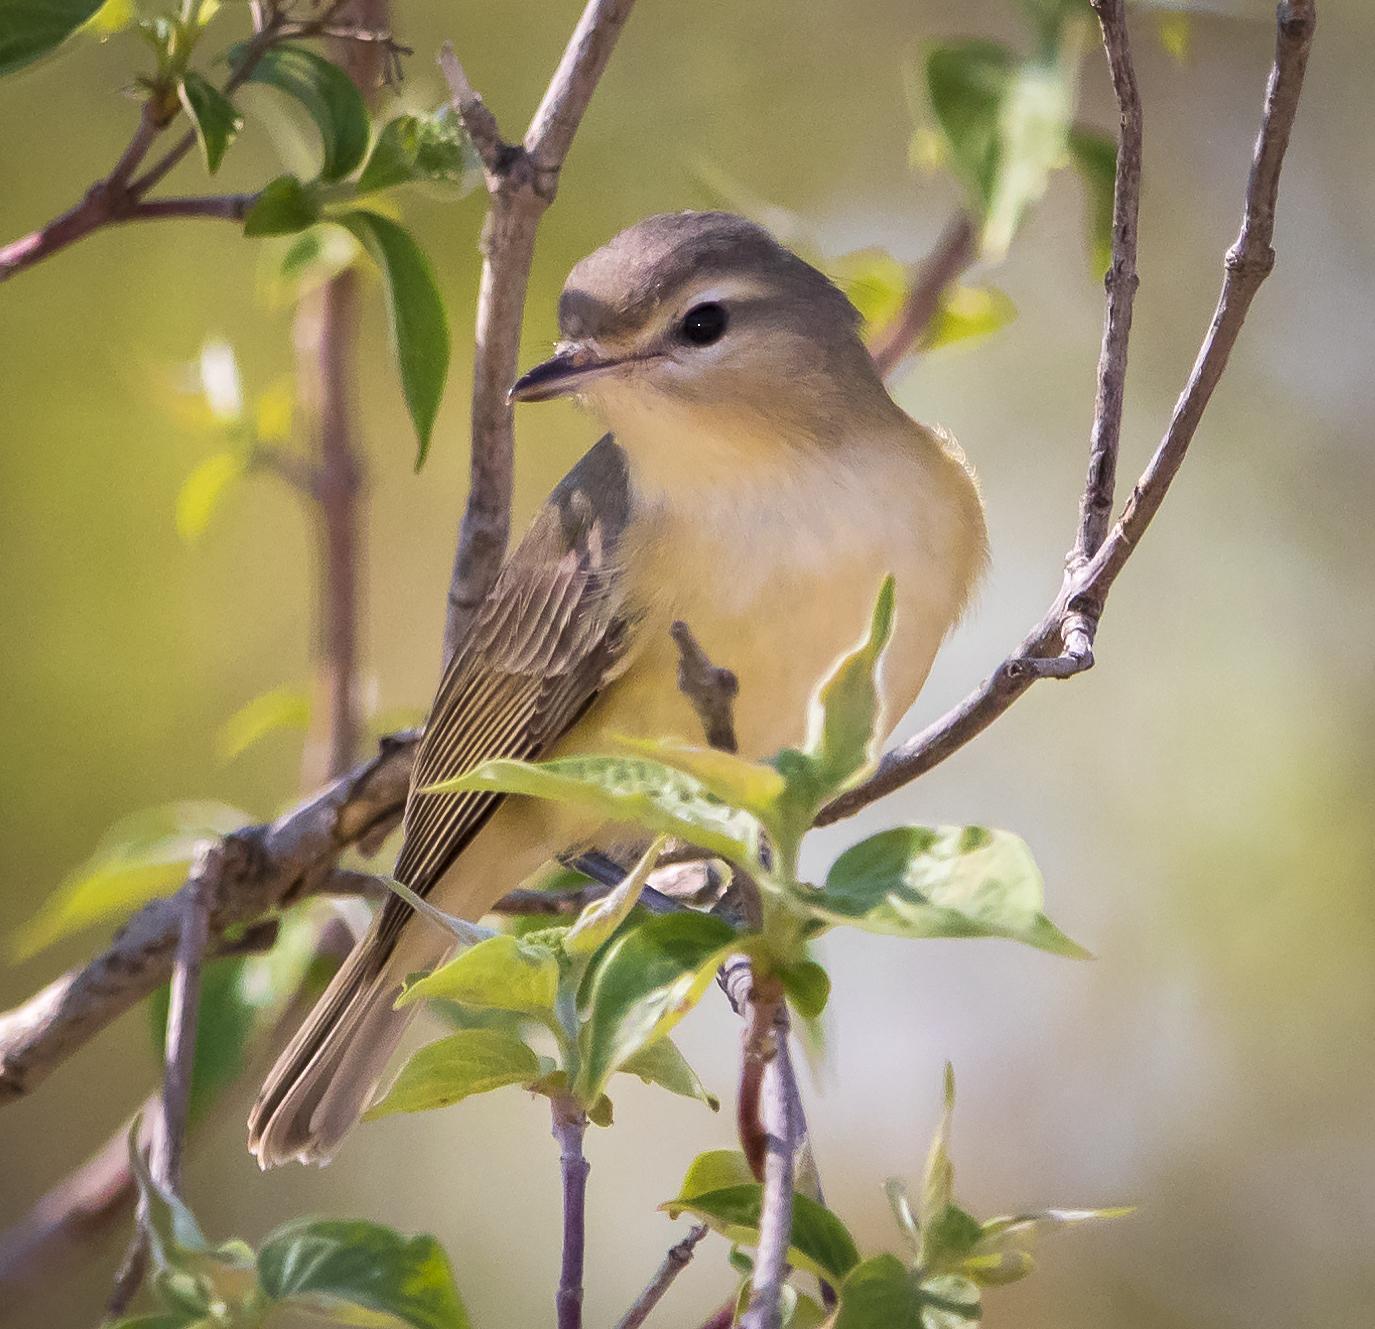 Warbling Vireo Photo by Tom Gannon